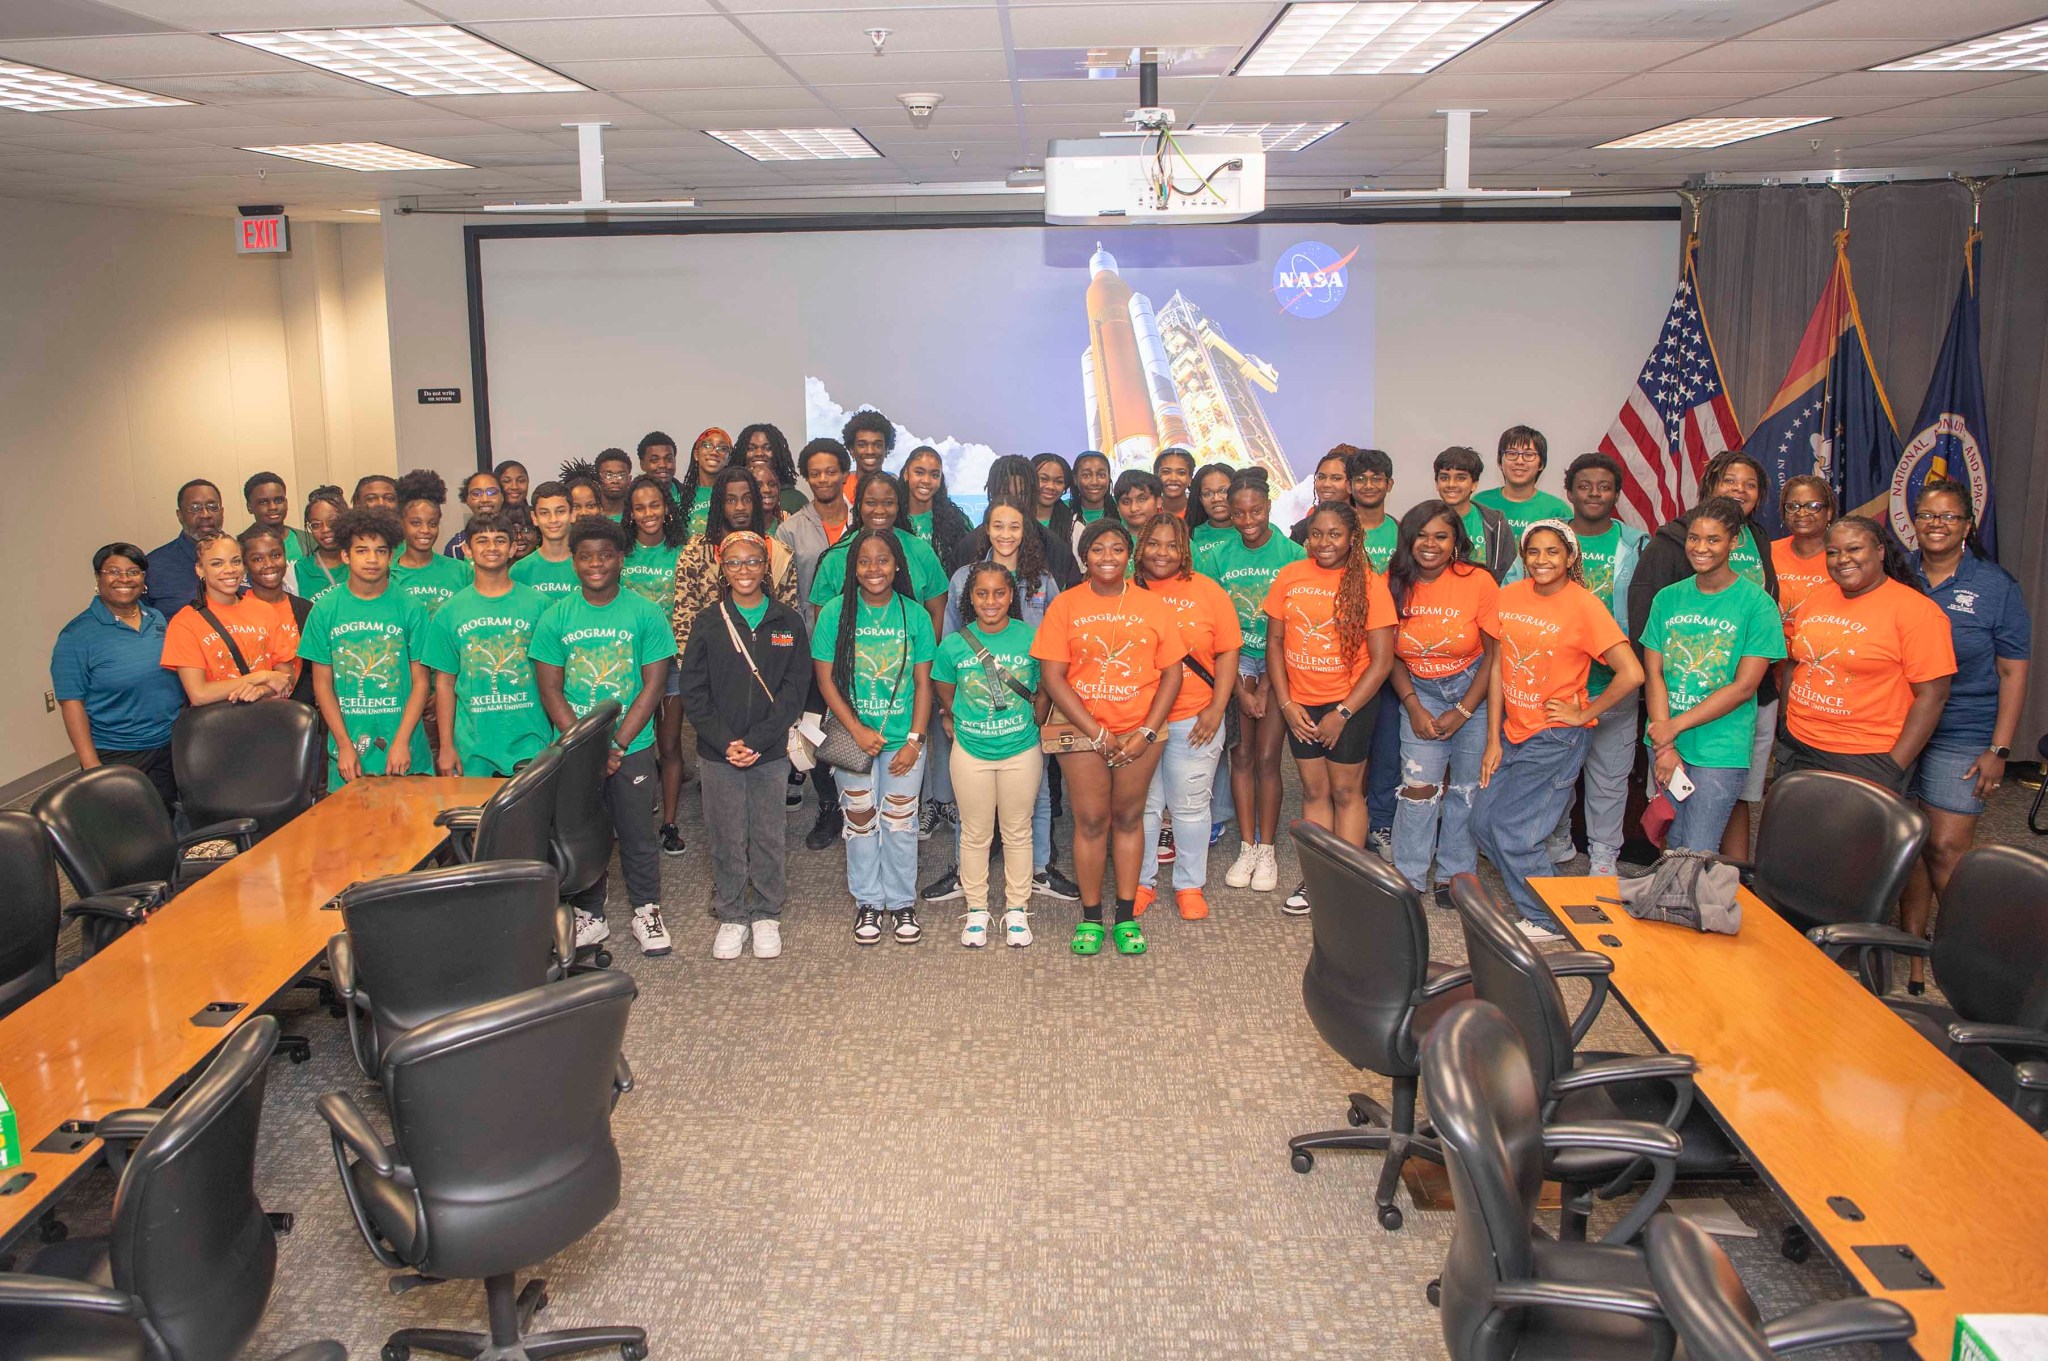 Members of the Florida A&M University Program of Excellence in STEM pose in front of projector screen